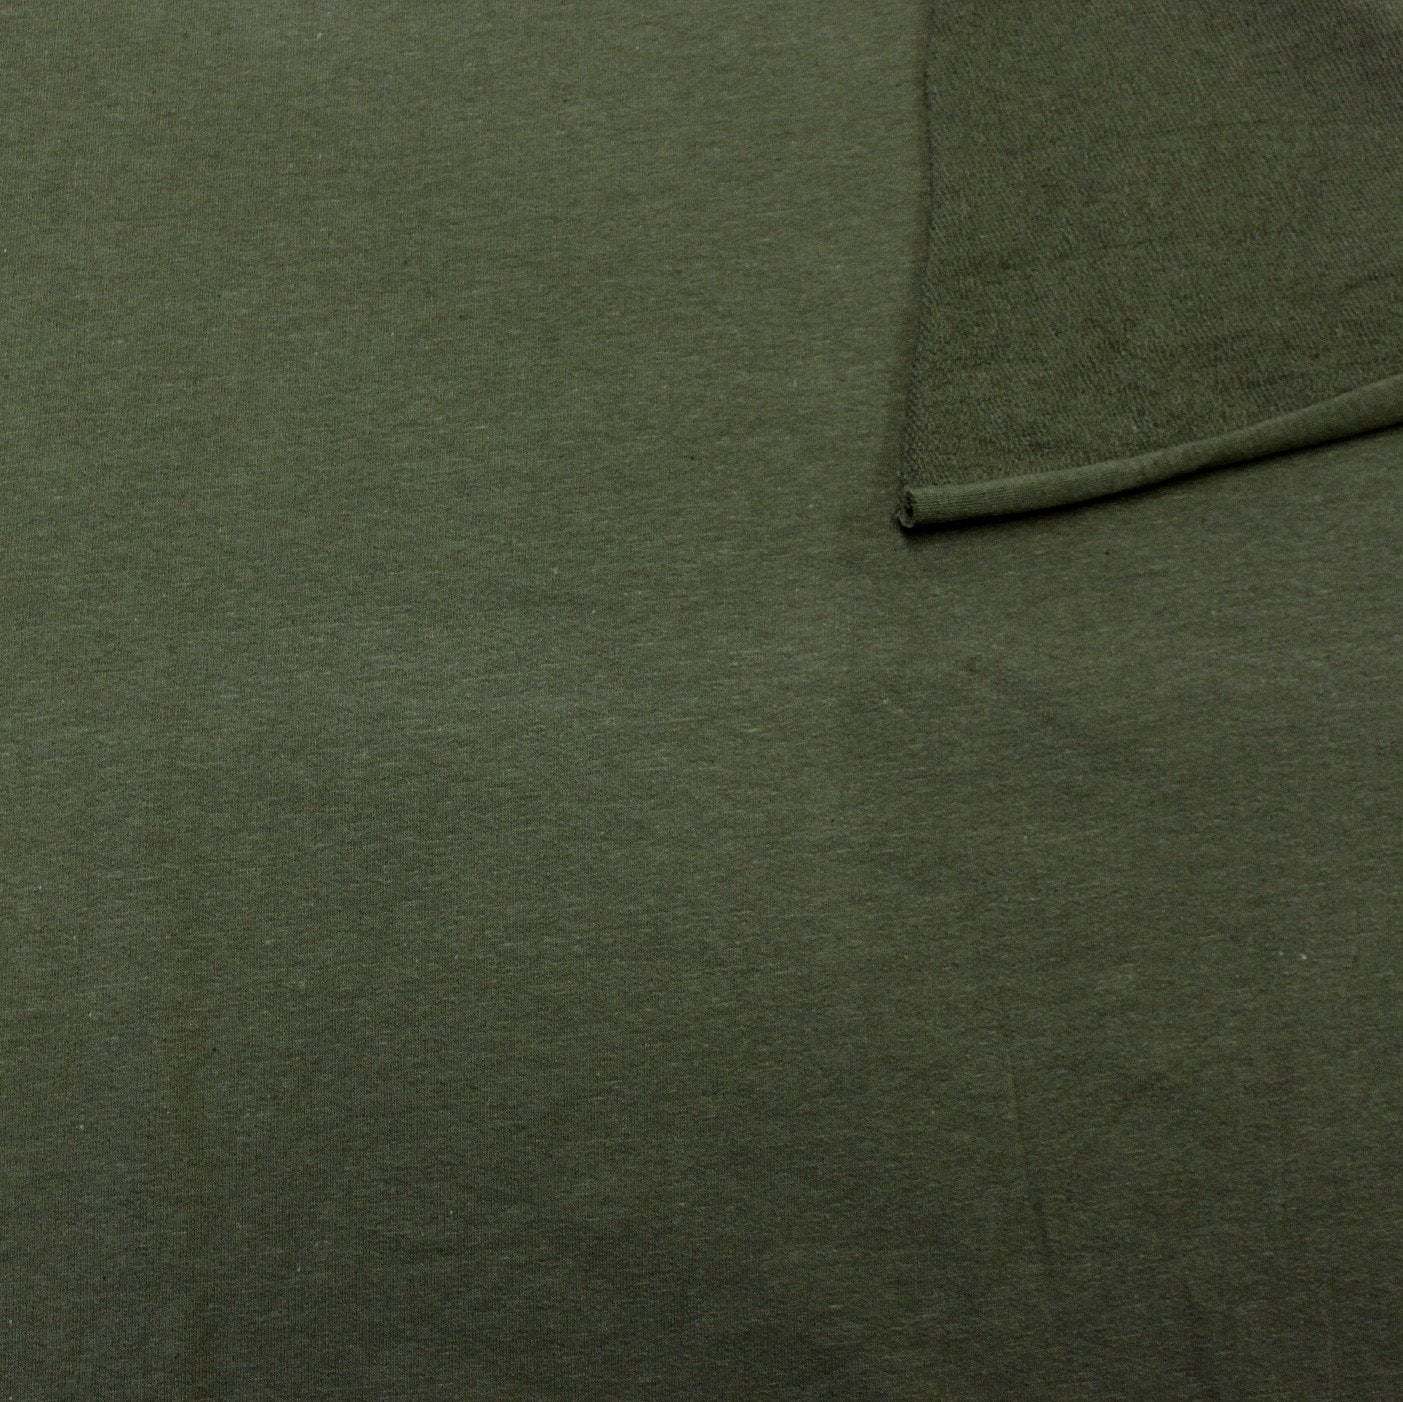 Solid Olive Green 4 Way Stretch French Terry Knit Fabric With Spandex Fabric, Raspberry Creek Fabrics, watermarked, restored